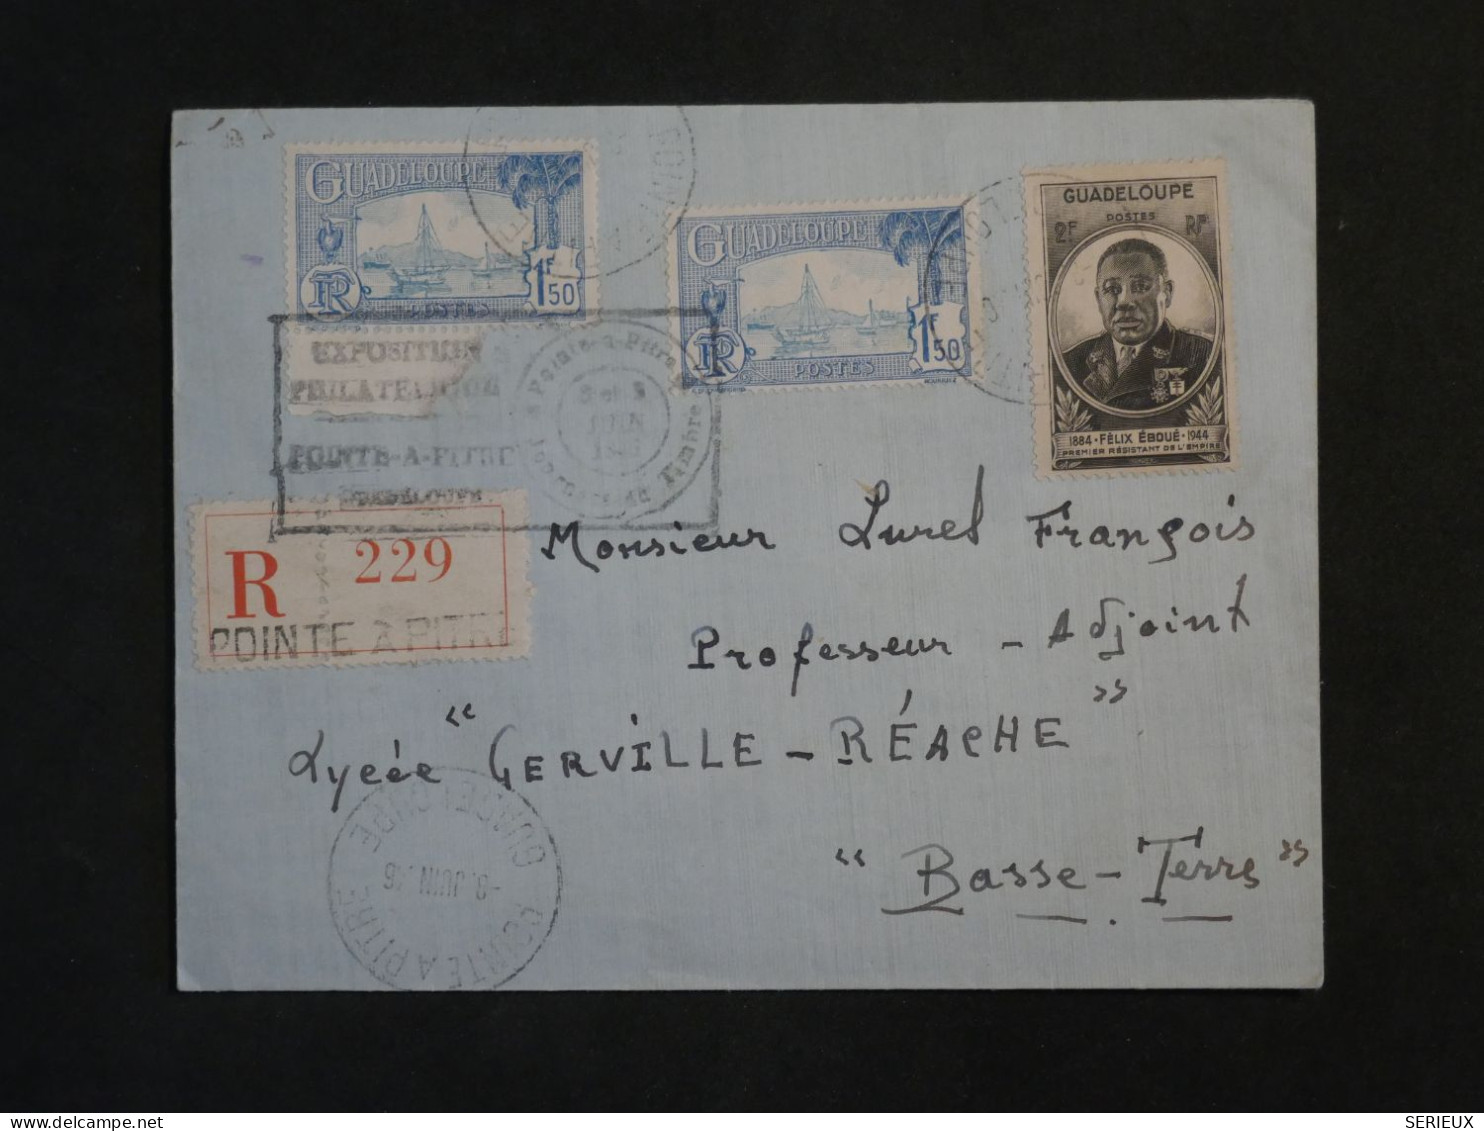 BW4  GUADELOUPE   BELLE  LETTRE EXPOSITION RECO RR  1907 POINTE A PITRE  +CACHETS + AFF. INTERESSANT++  ++ - Lettres & Documents